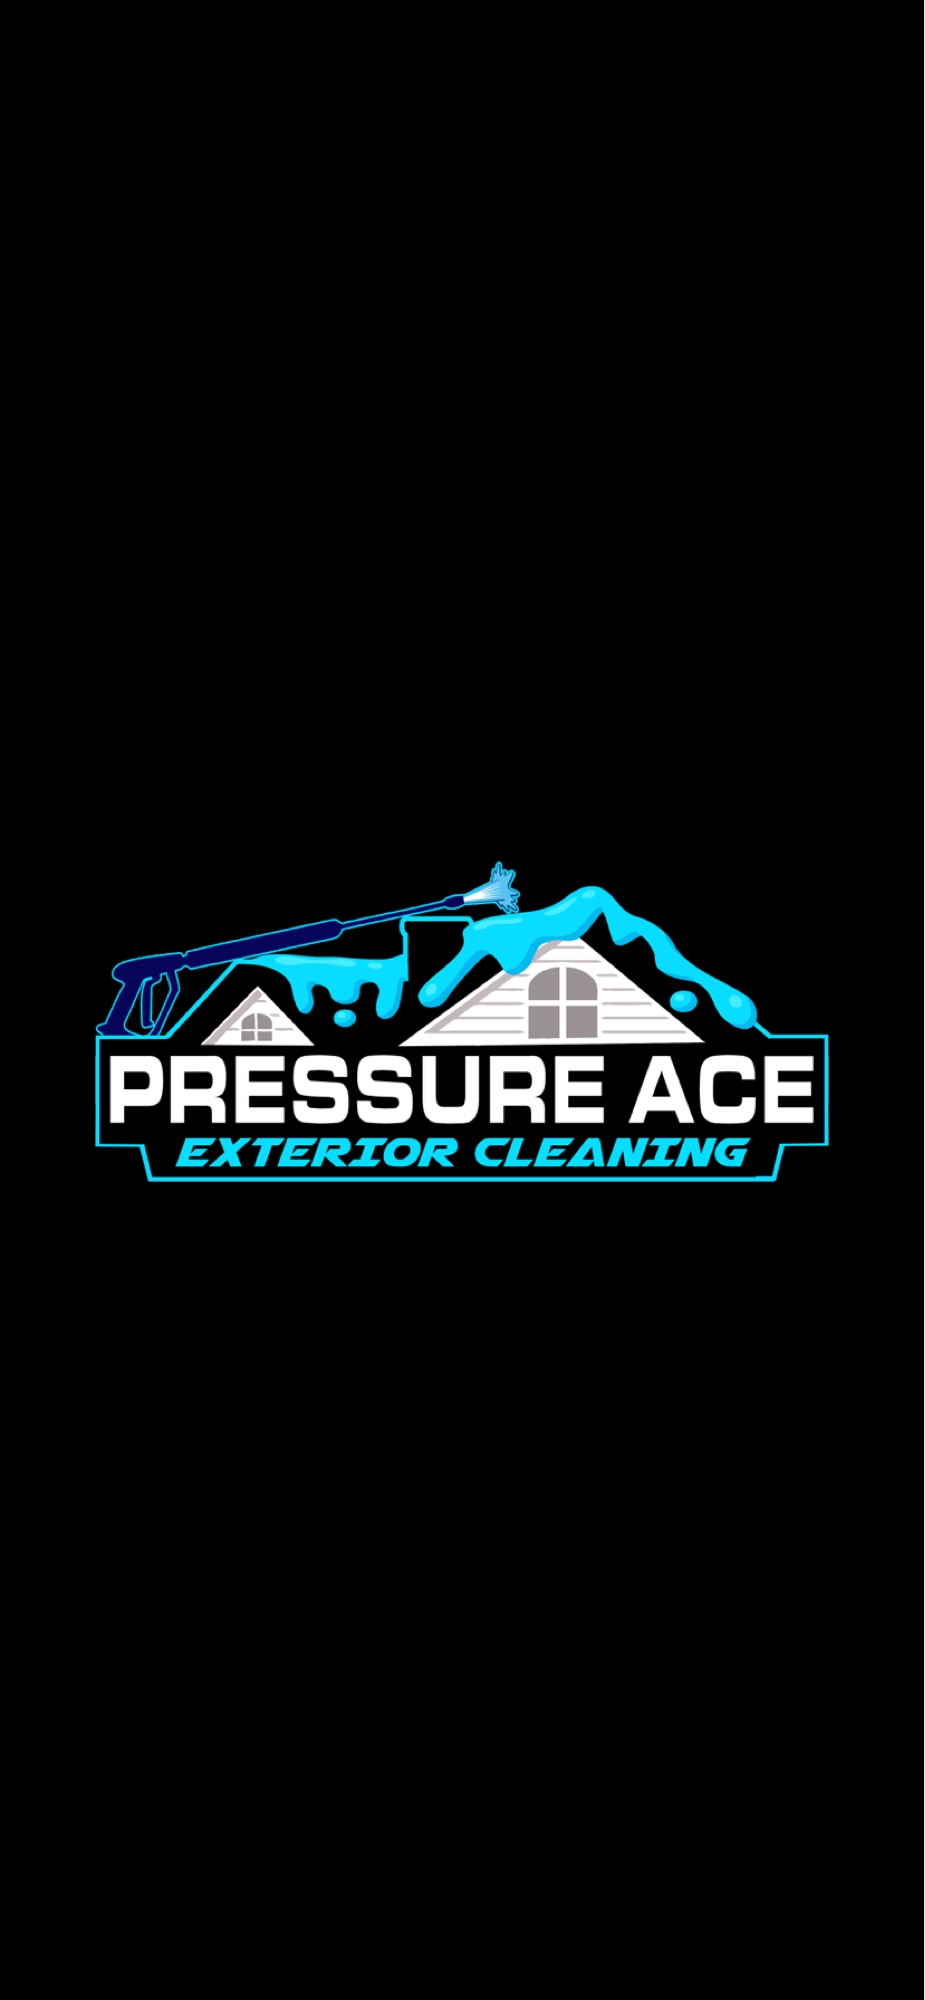 Pressure Ace Exterior Cleaning Logo